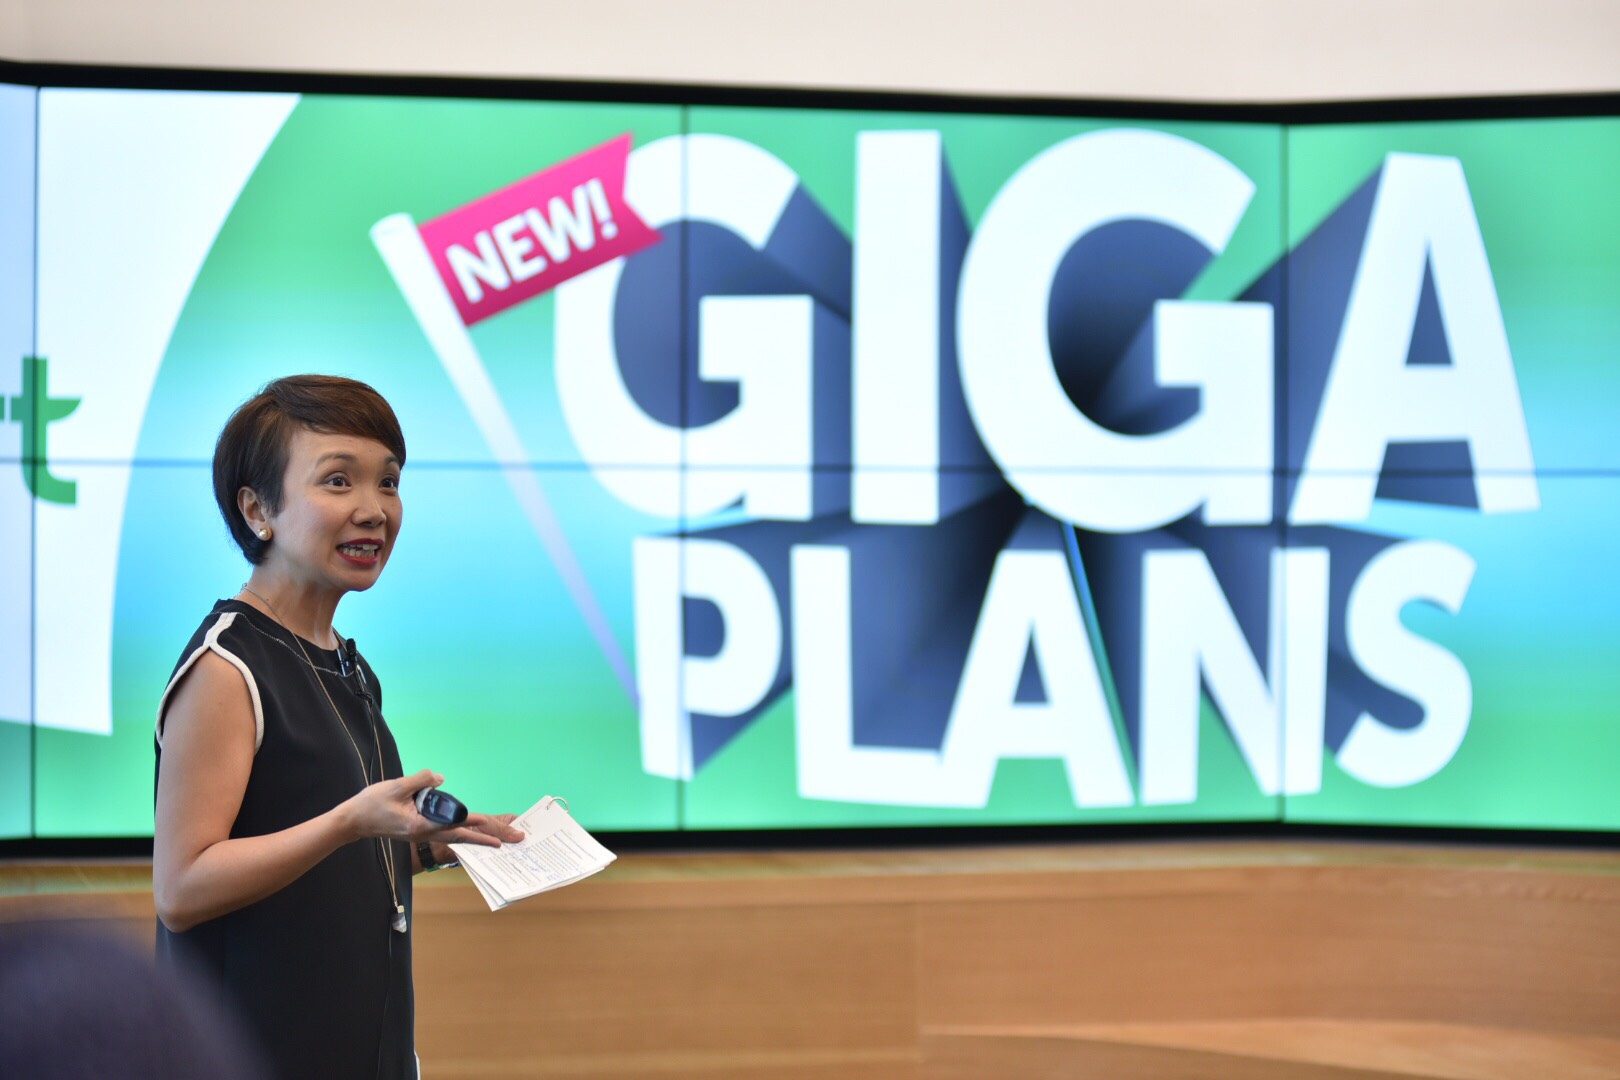 GIGA PLANS. Smart Bro's new exciting data plans revealed by Kathy Carag 